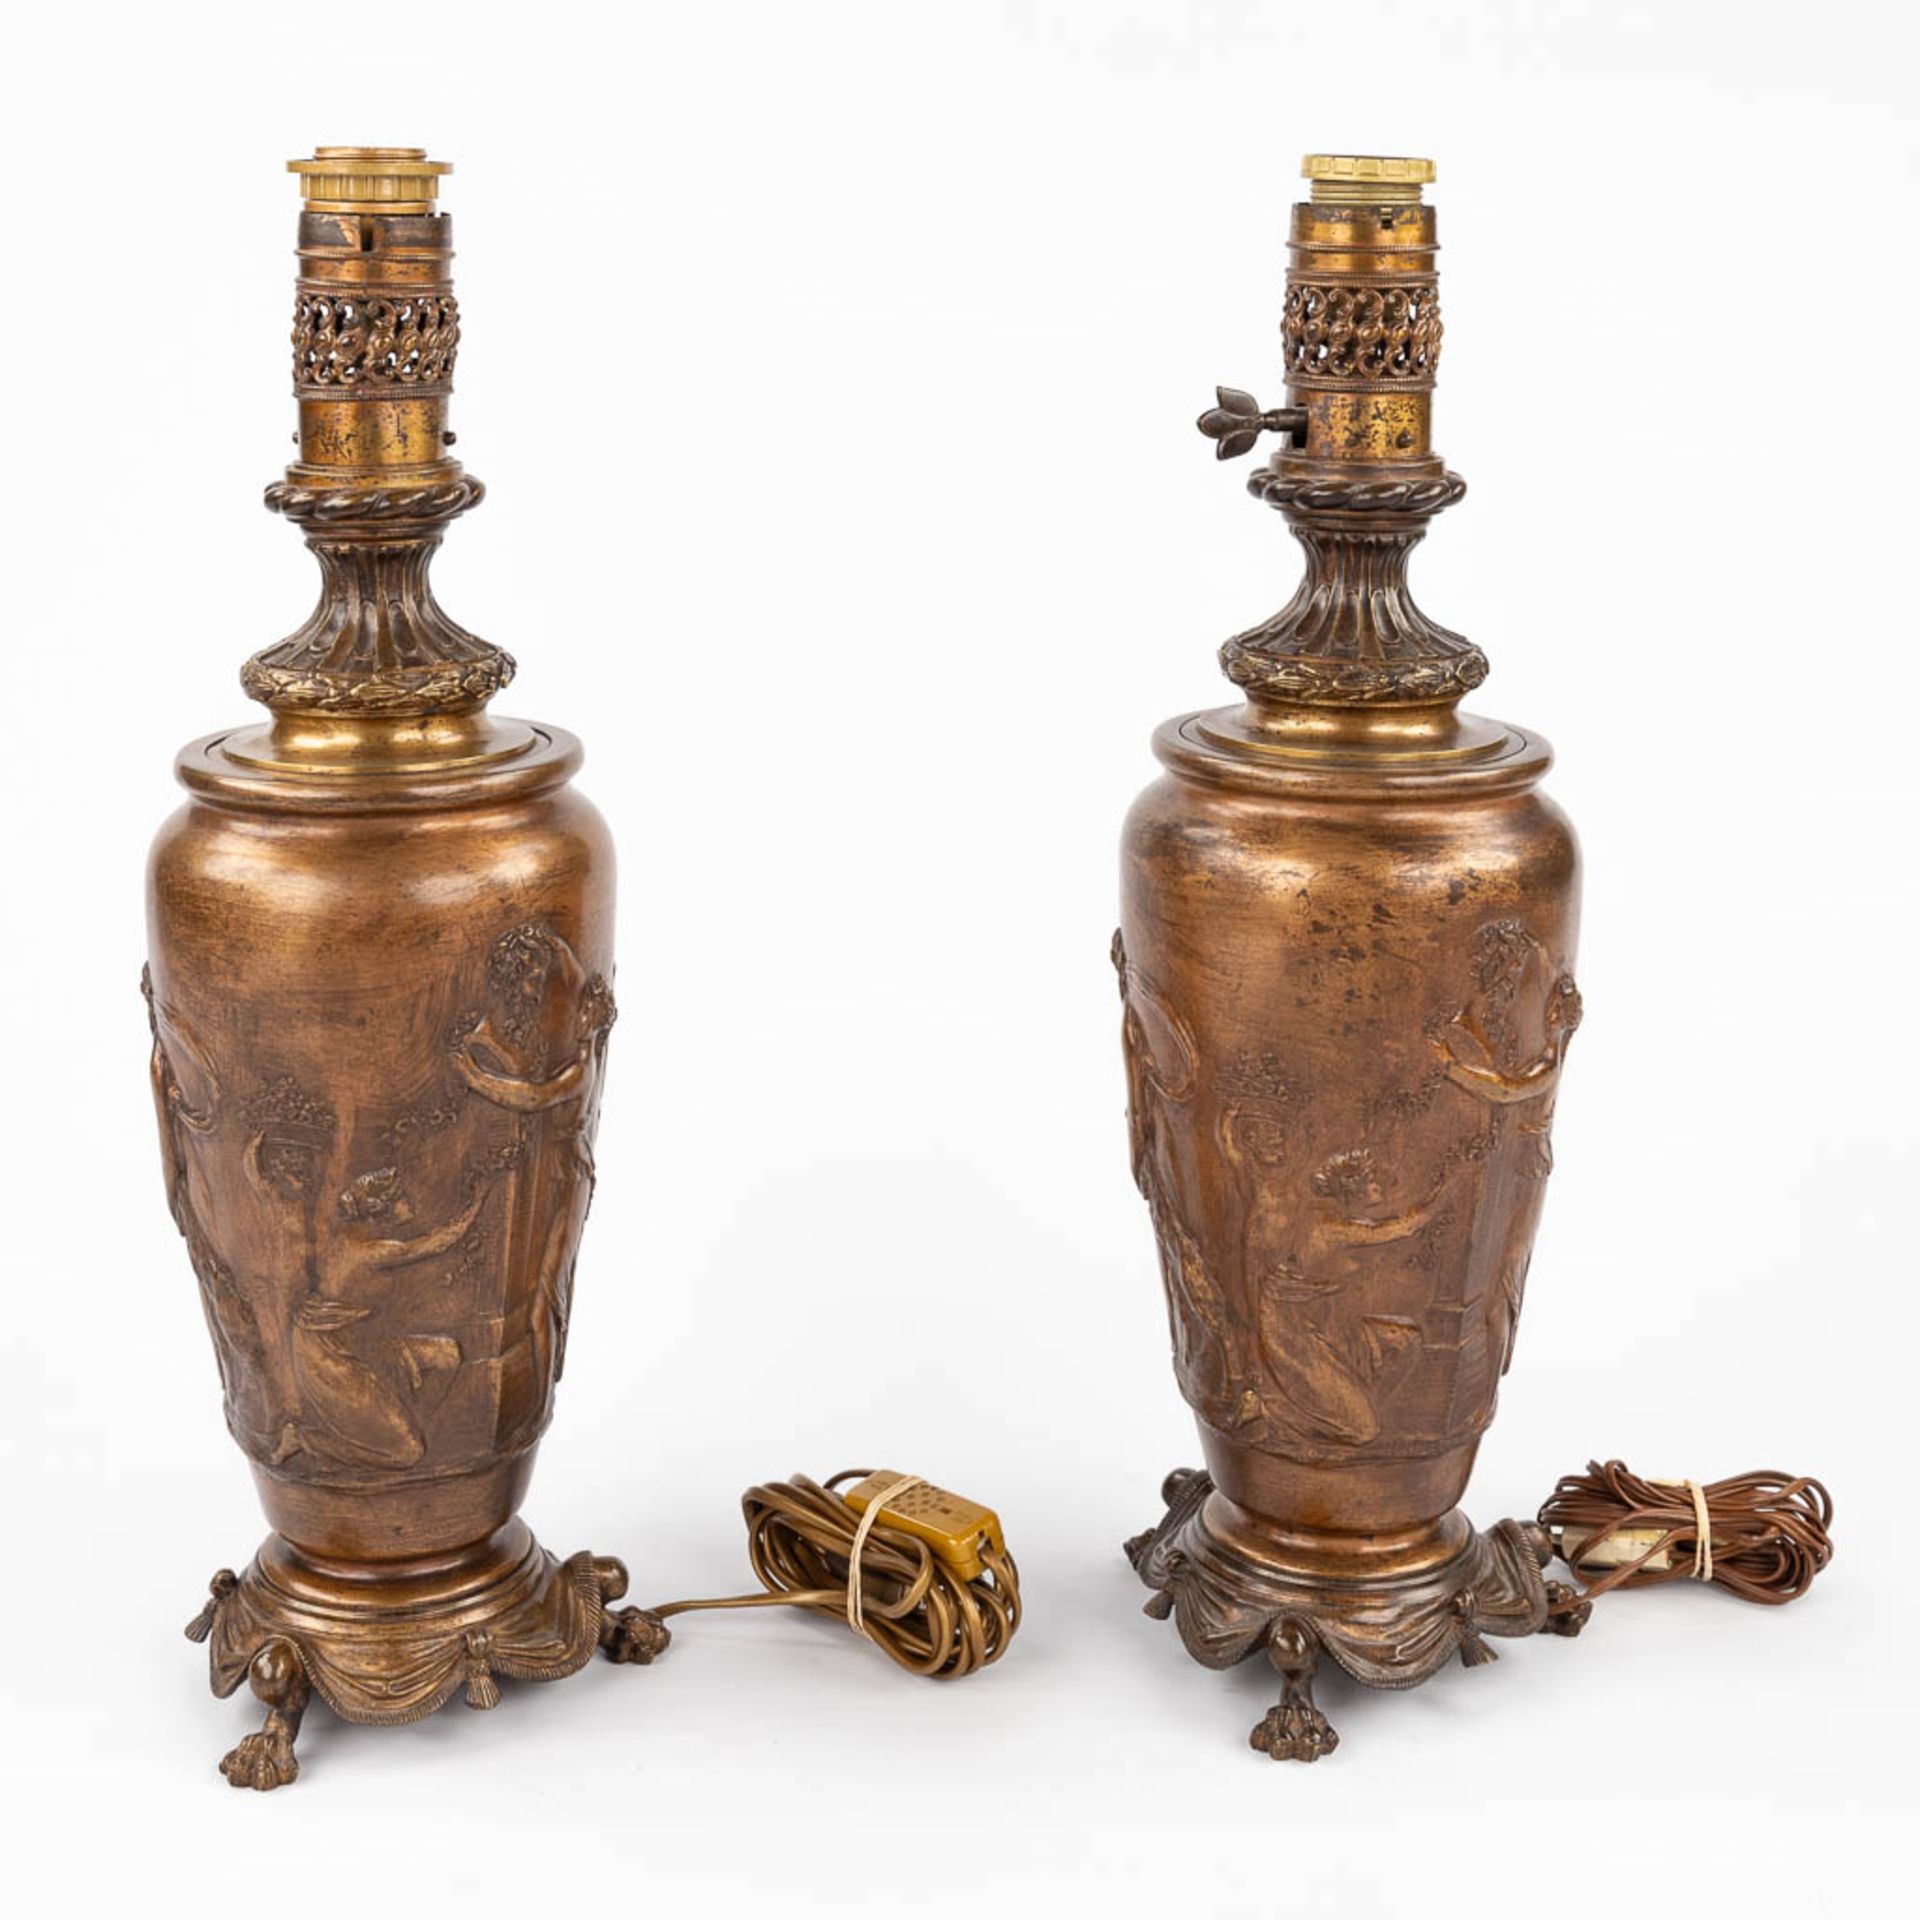 CLODION (1738-1814) 'Pair of oil lamps' bronze decorated with Satyrs and Nymphs. 19th C. (H:55 x D:1 - Bild 5 aus 14